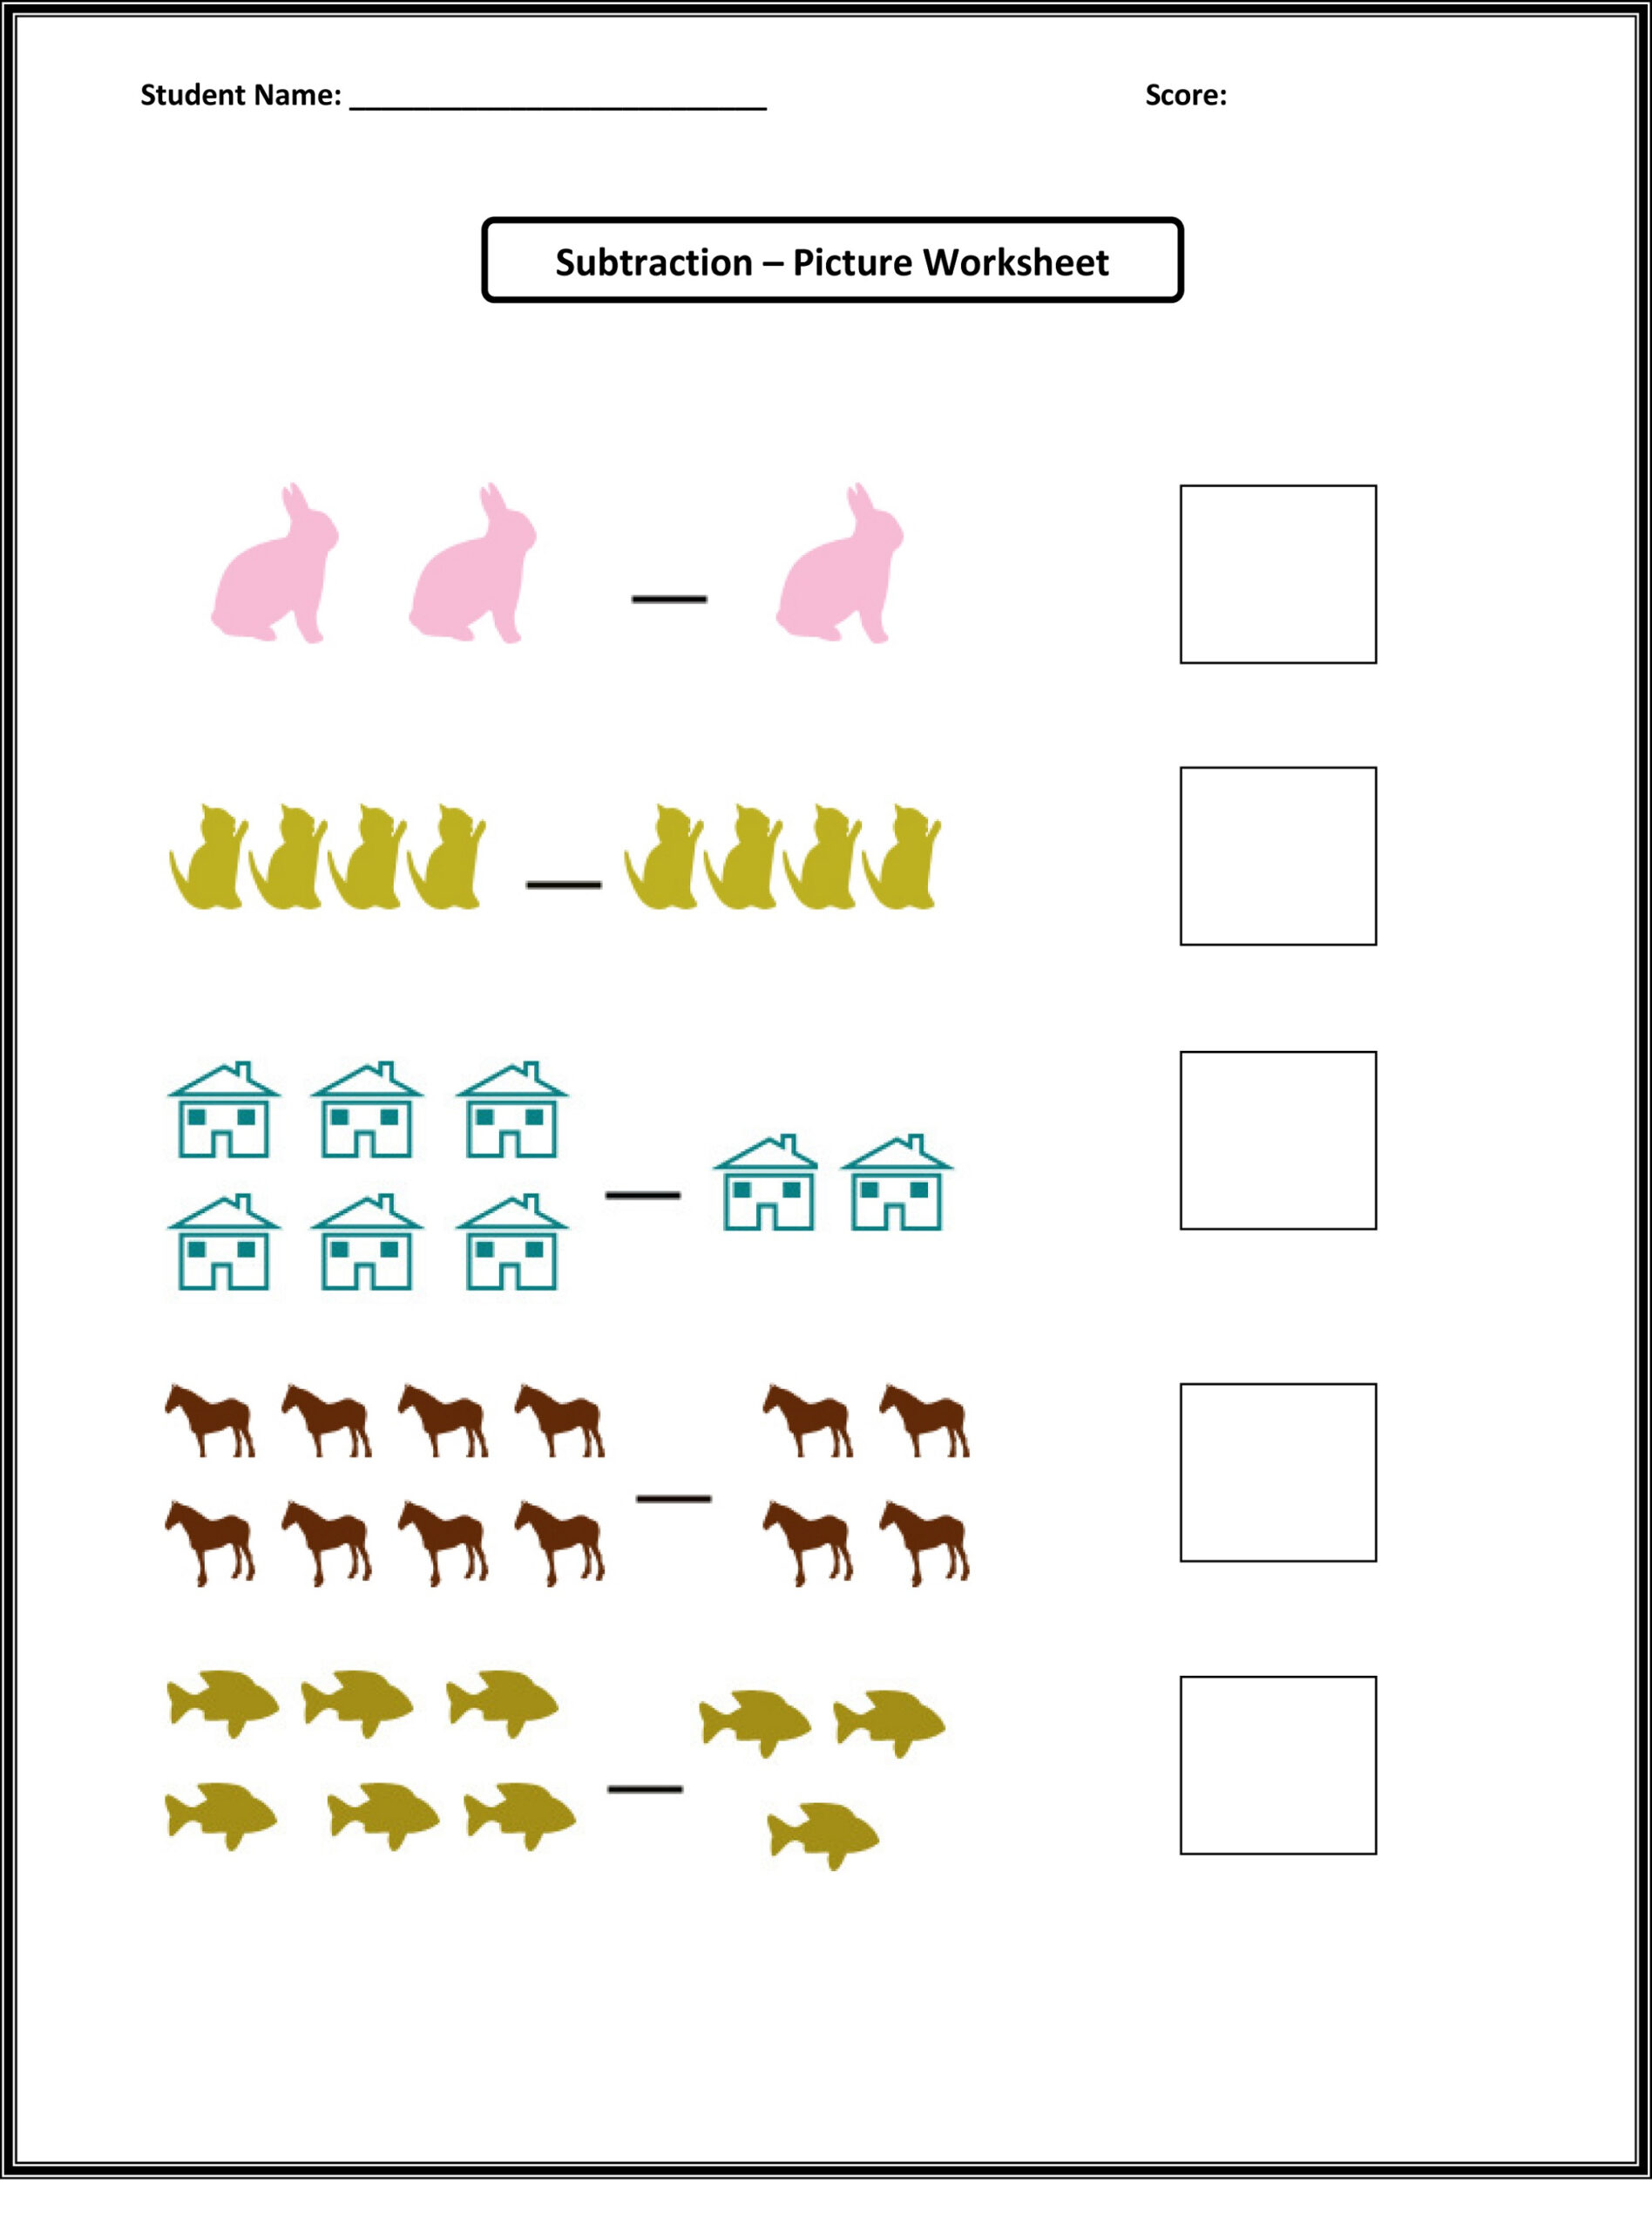 Toddler Worksheets For Quick Download Educative Printable